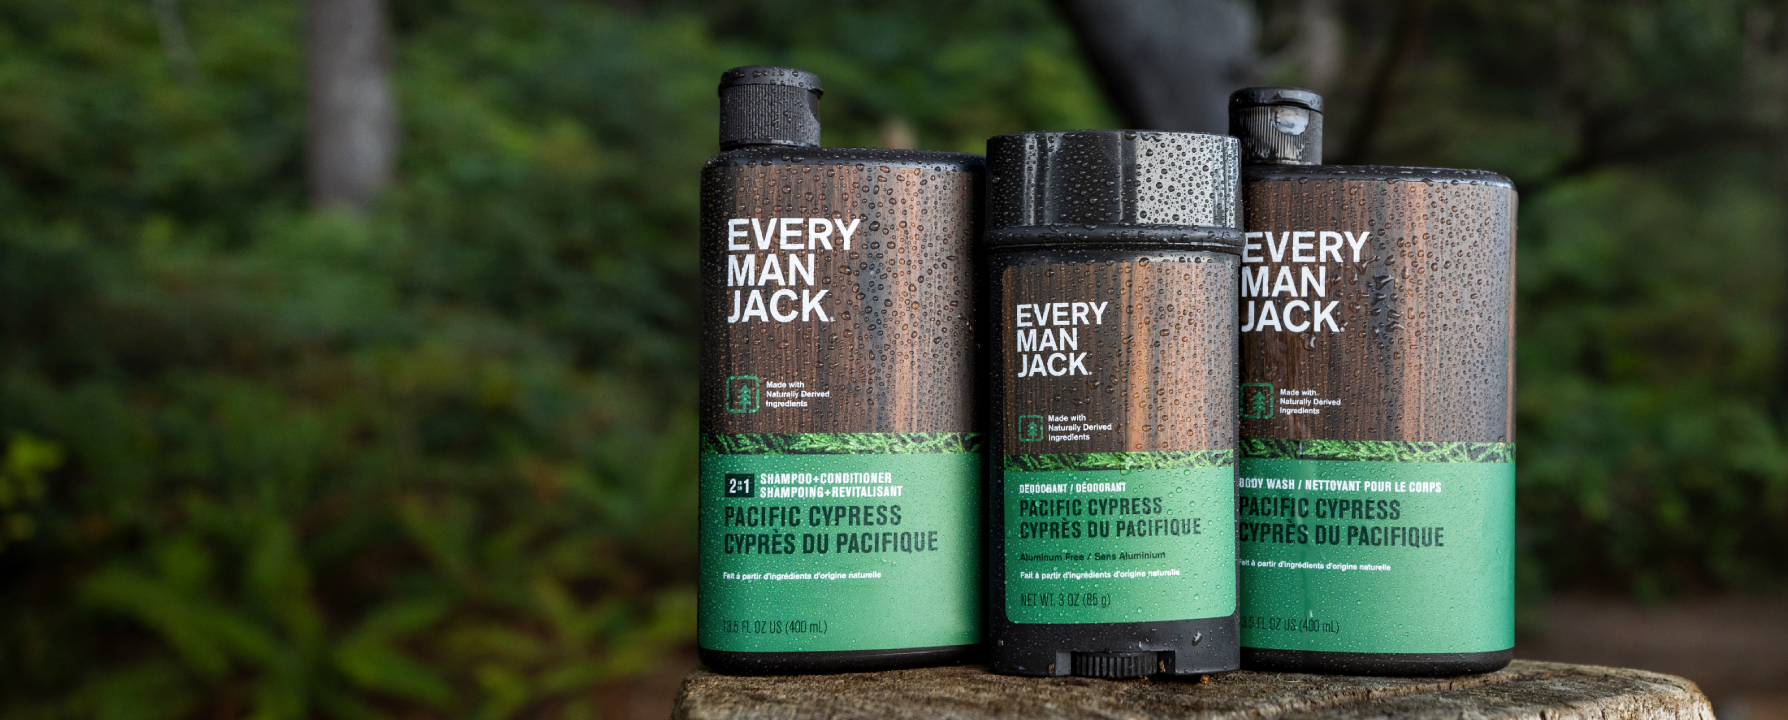 Every Man Jack products in a haunted Halloween forest